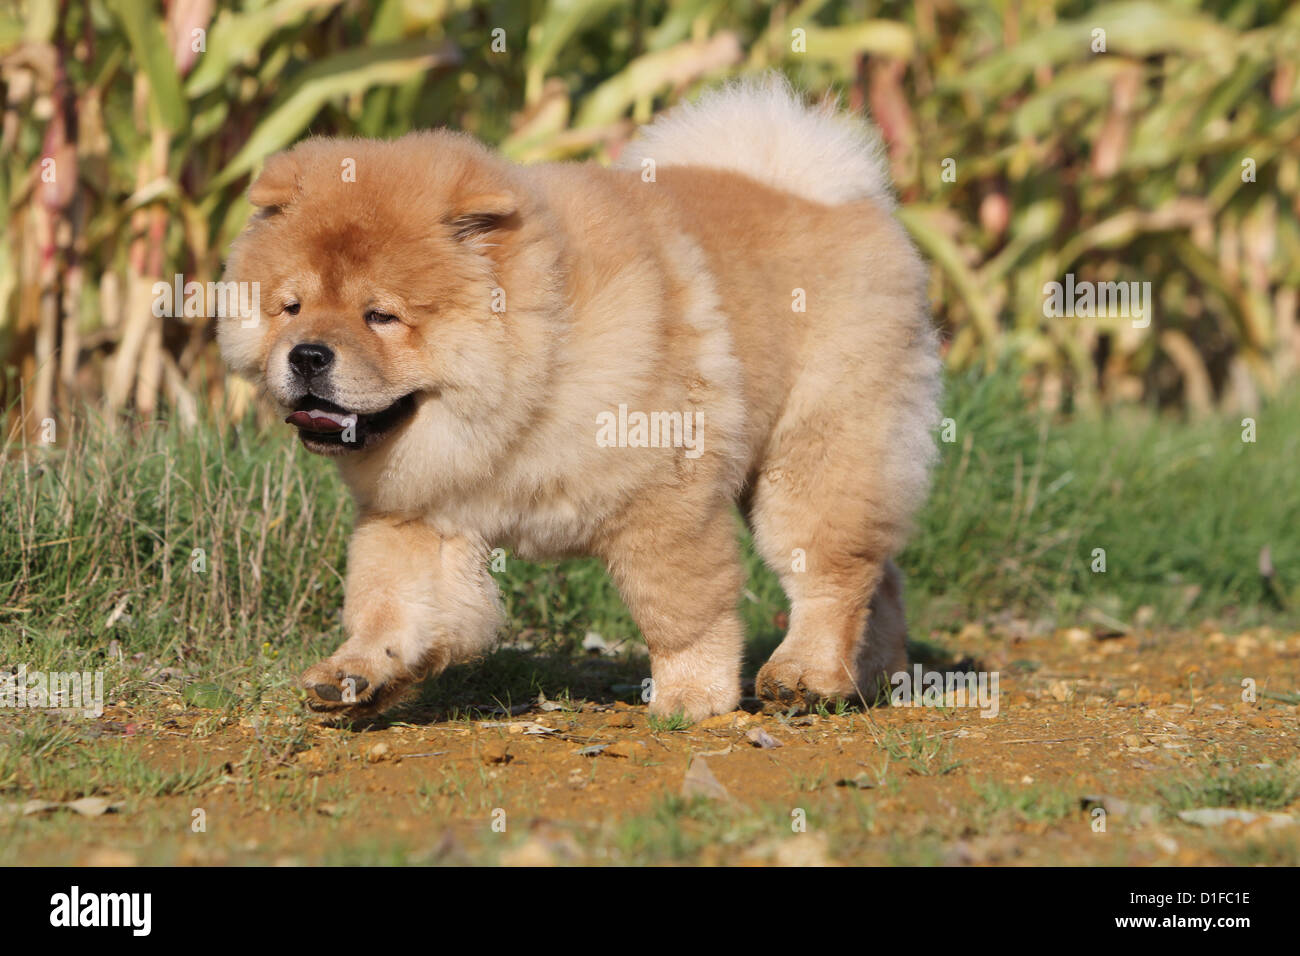 Dog Chow Chow Chow Chow China Cinnamon Red Puppy Puppies Stand Standing Profile Baby Dogs Walk Walking Run Running To Run Stock Photo Alamy